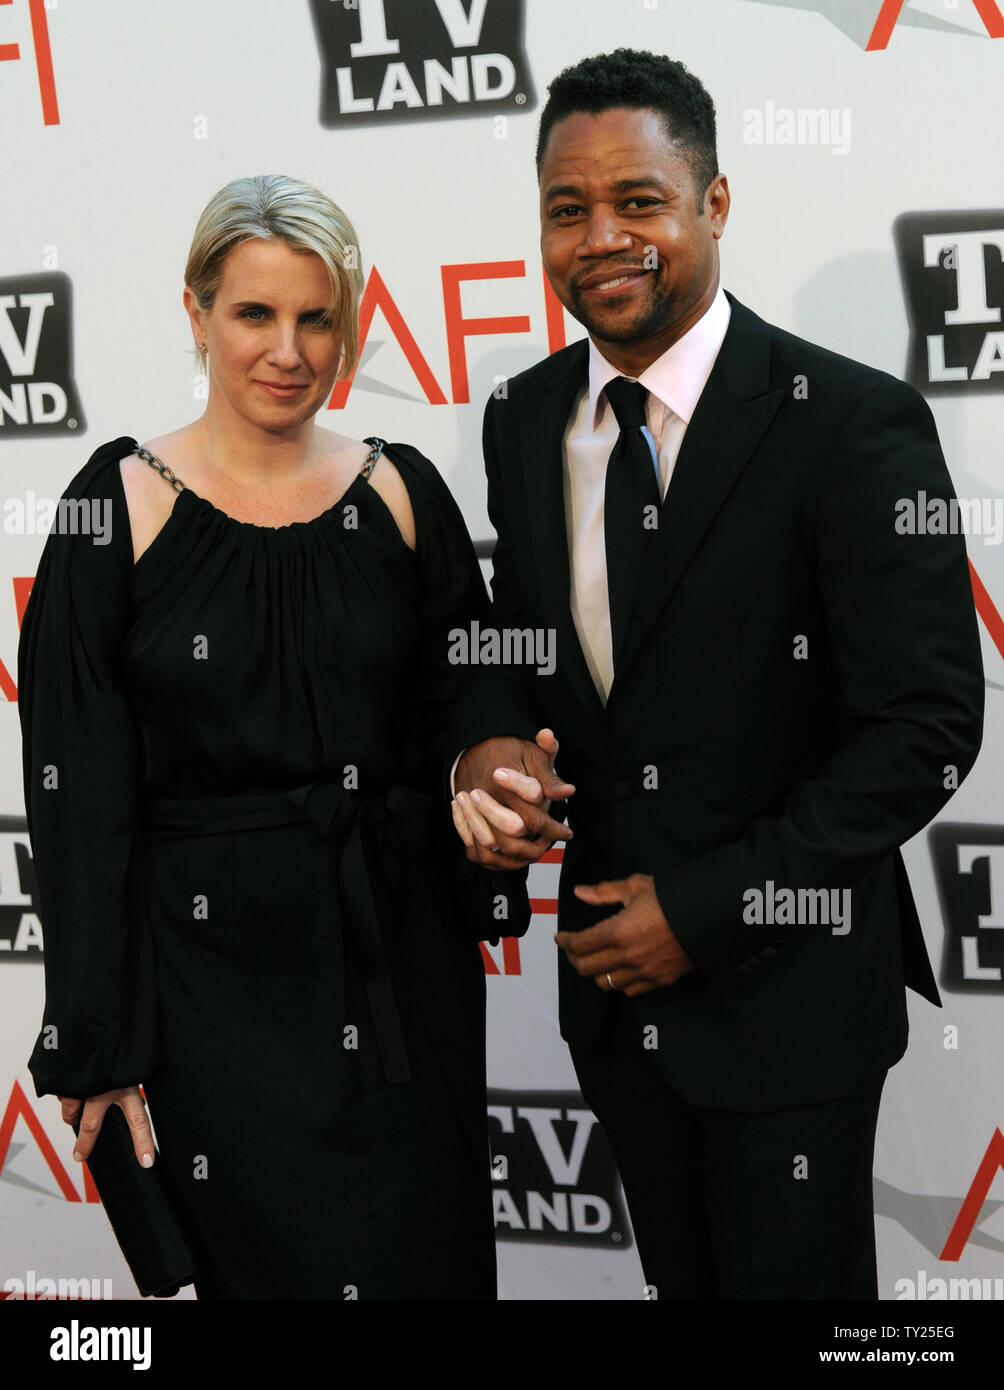 Actor Cuba Gooding Jr. and his wife Sara Kapfer arrive for the taping of 'TV Land Presents: AFI Life Achievement Award Honoring Morgan Freeman', at Sony Studios in Culver City, California on June 9, 2011. The special will air June 19th on TV Land.  UPI/Jim Ruymen Stock Photo